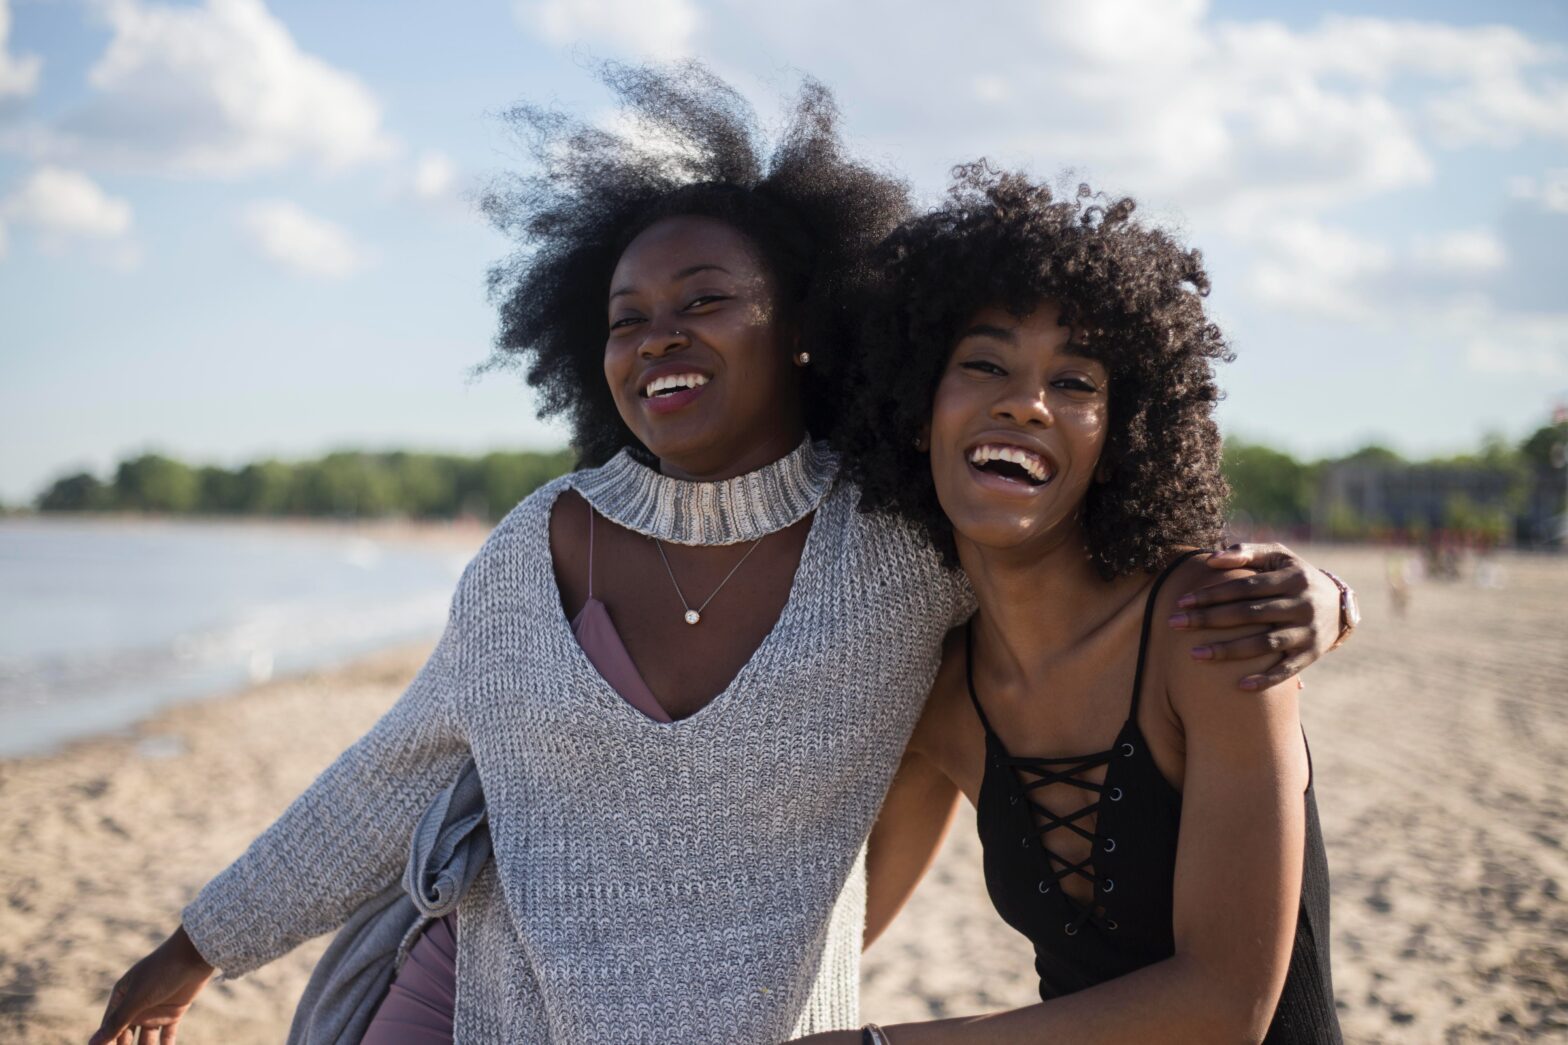 Some of the most impactful relationships in our lives are the ones we share with those very specific friends, family members, or co-workers who feel sent from above. These are known as our platonic soulmates, and here’s how to know if you have one in your life. pictured: two black girls hugging.